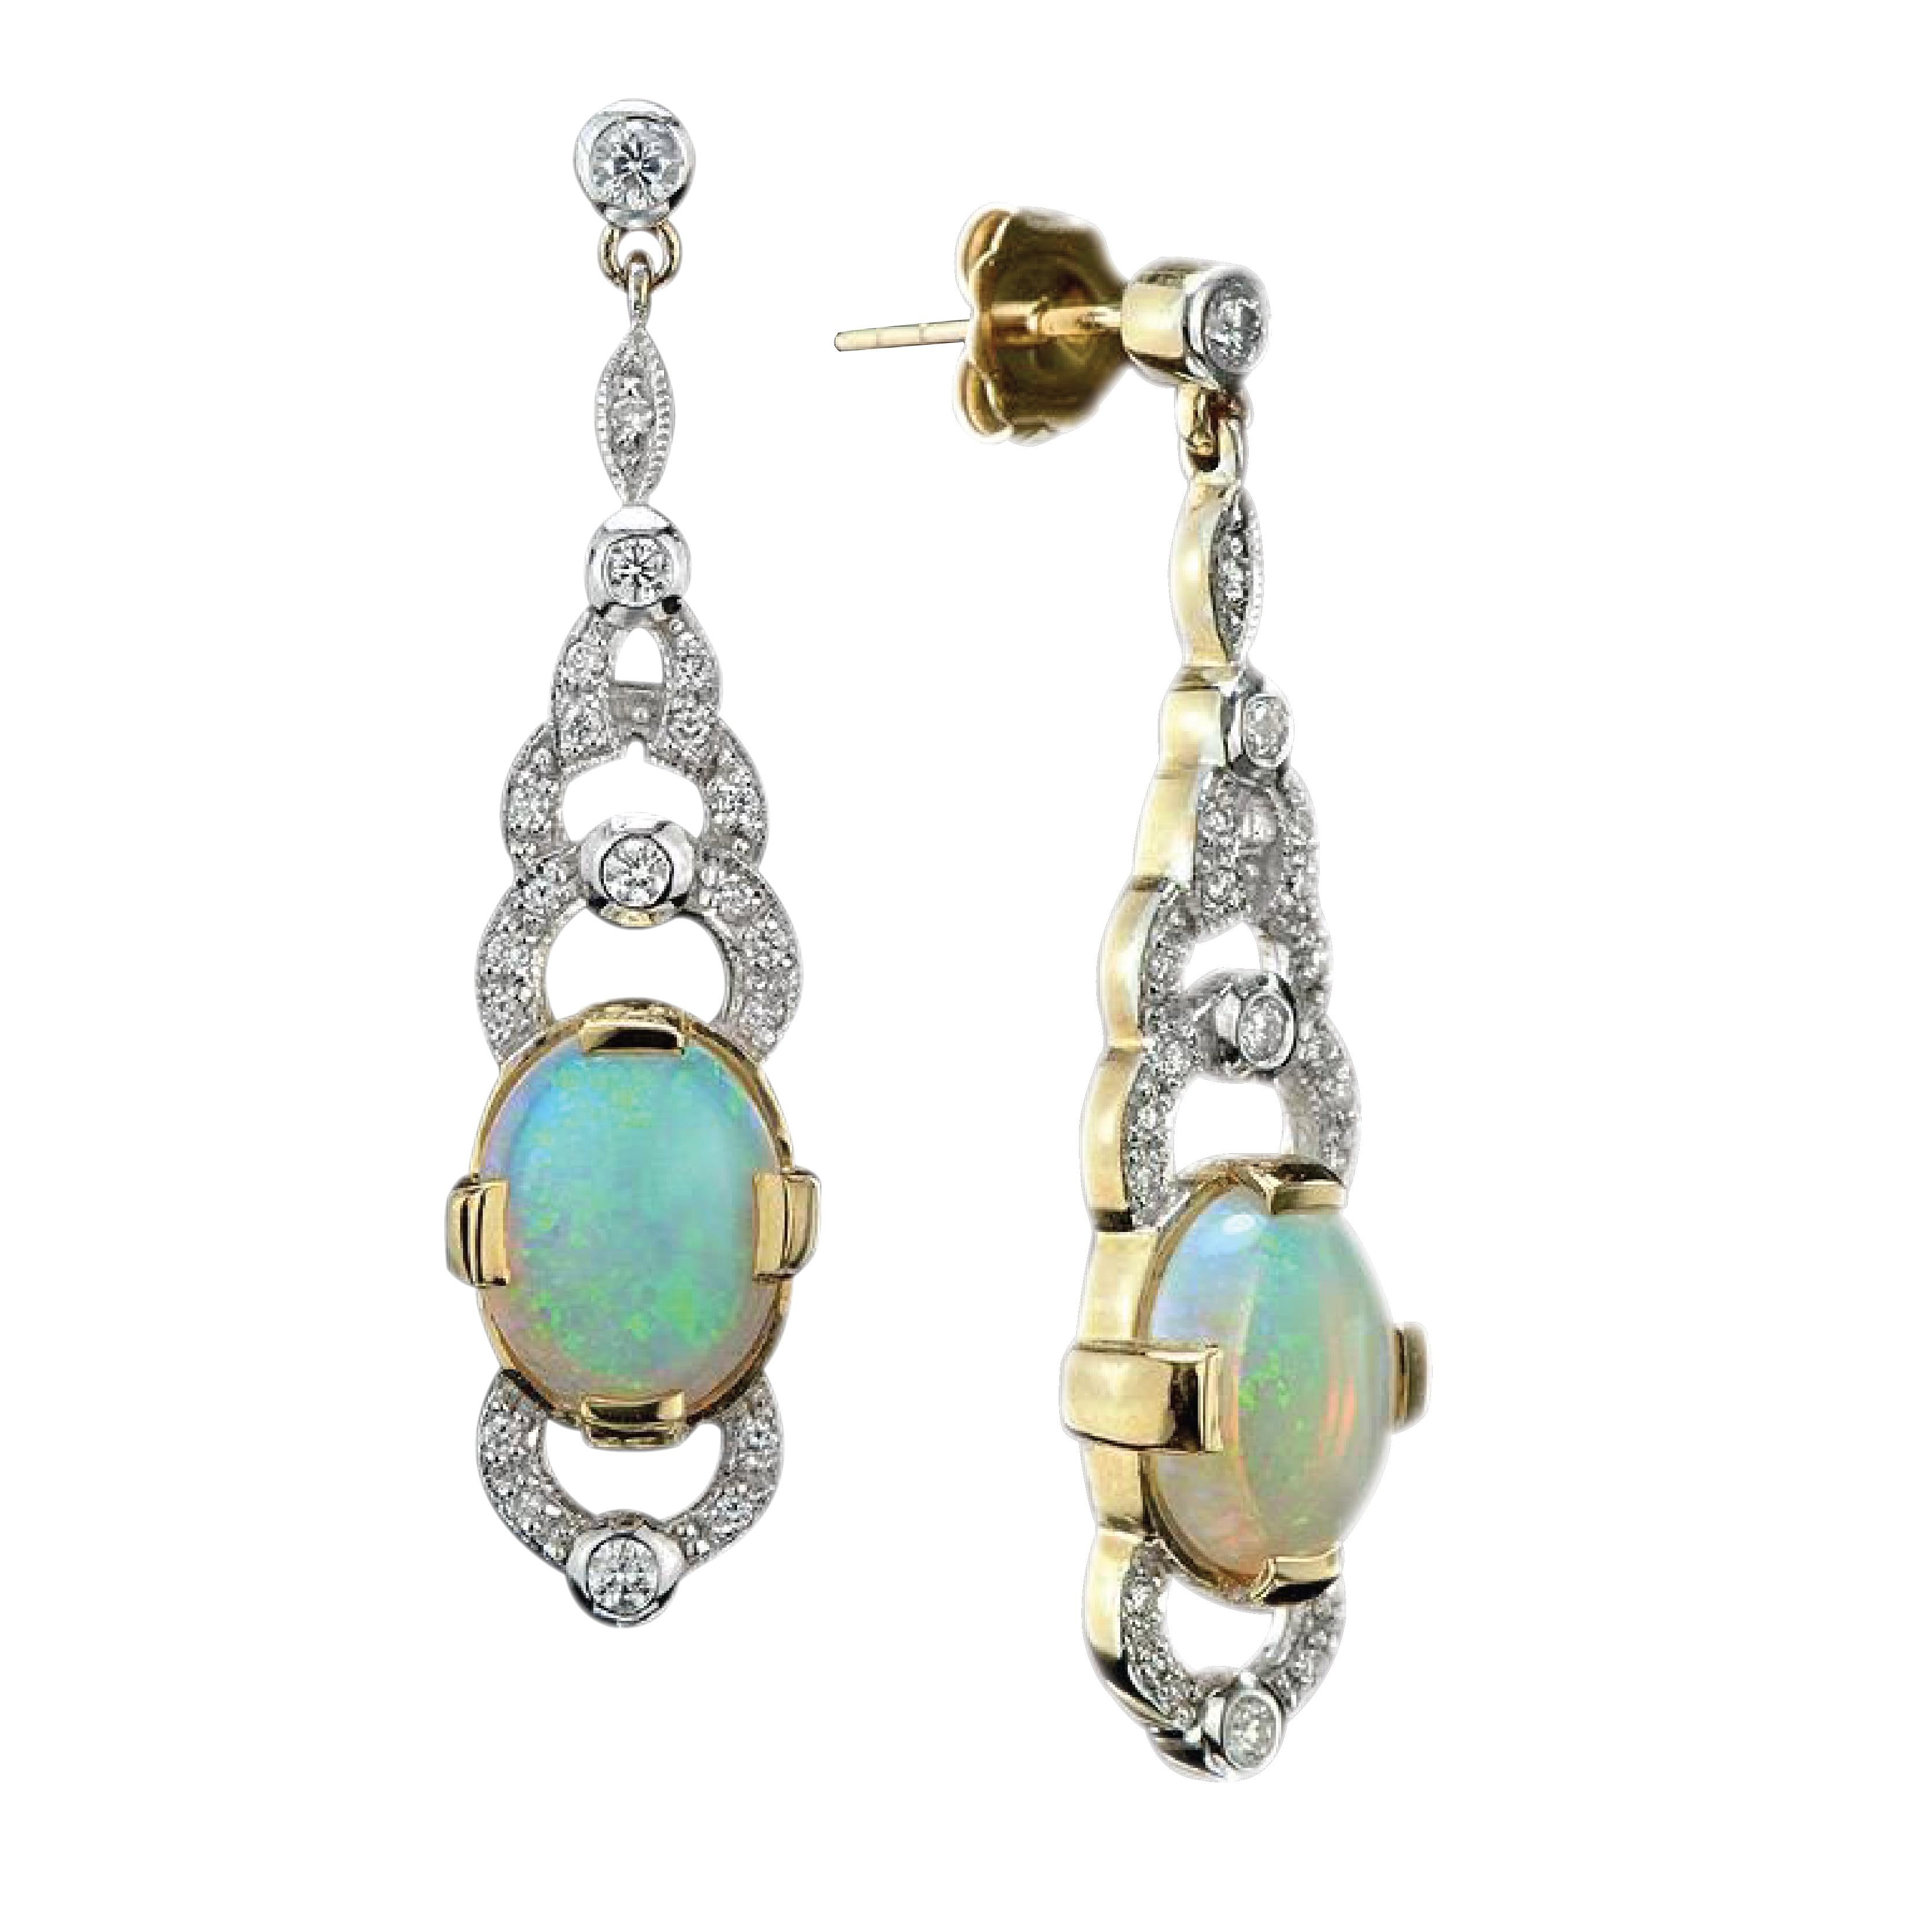 A pair of Art Deco style natural Australian opal and diamond drop earrings, each earring comprising an oval shape natural opal to the center of an open work diamond-set cluster above and below. Elegant and feminine, these articulated pendant